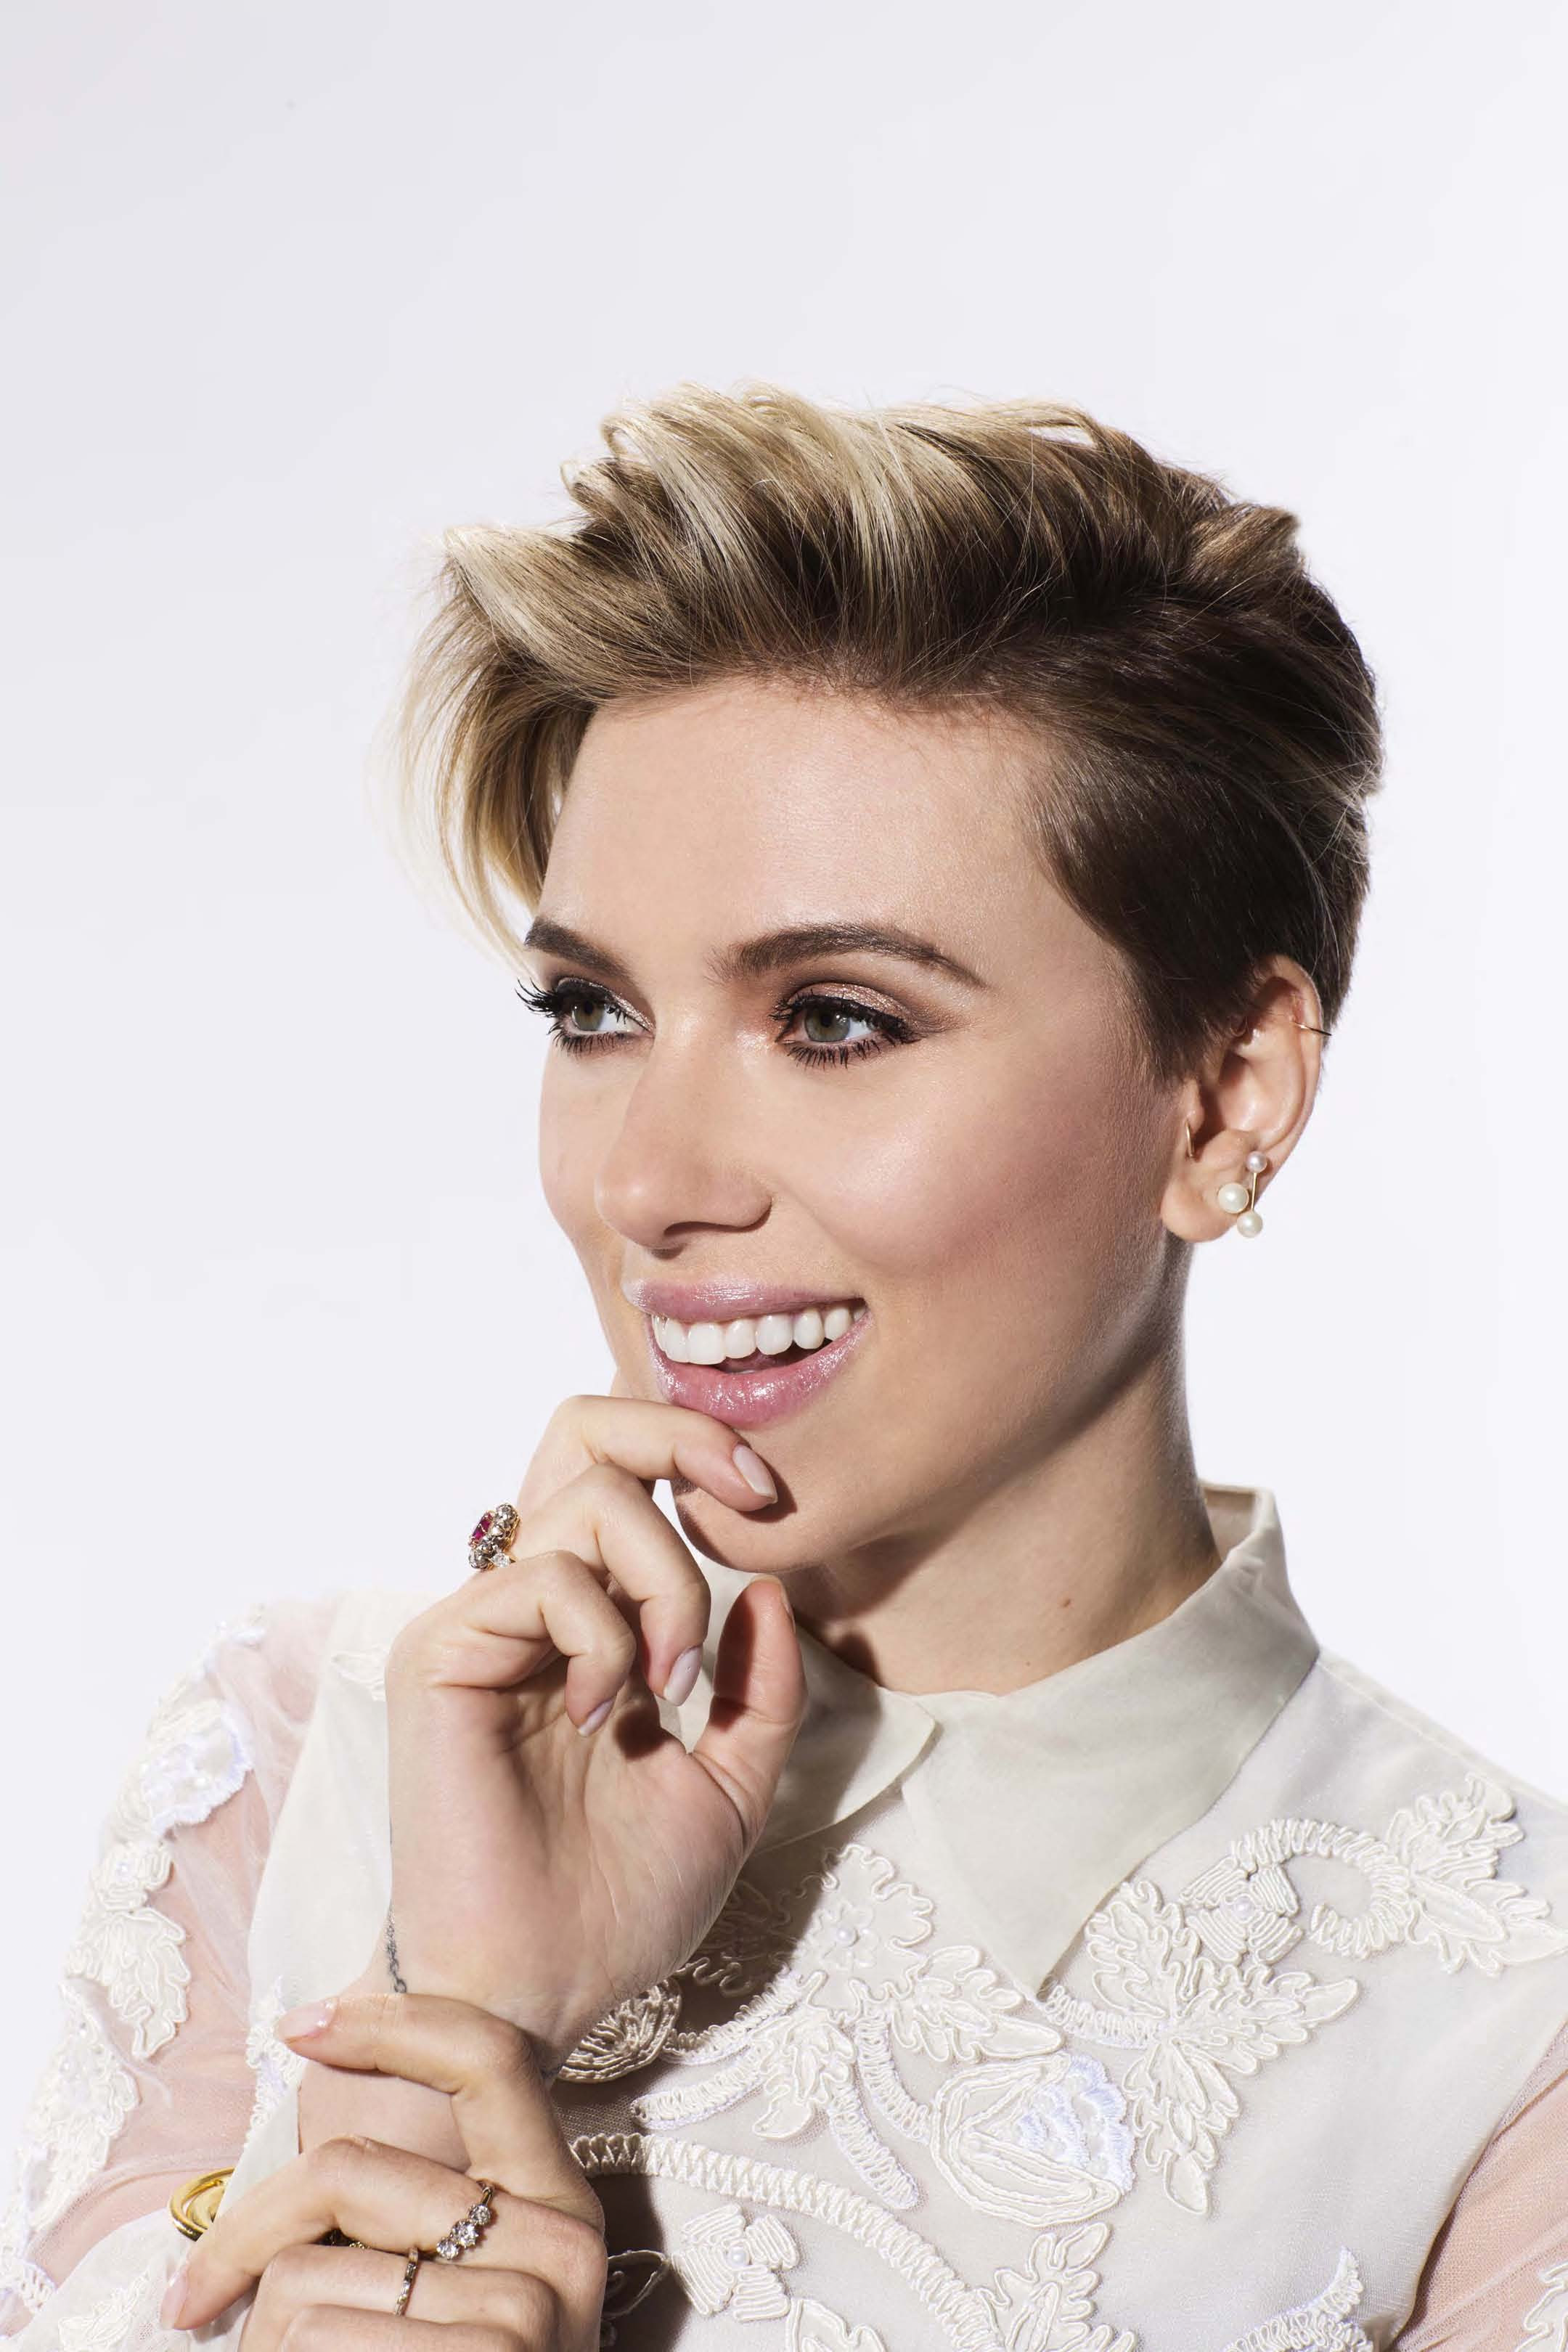 Scarlett Johansson to Receive 2016 Renaissance Award June 30, 2016 From Gene Siskel Film Center 1 The Gene Siskel Film Center (GSFC) of the School of the Art Institute of Chicago (SAIC) will celebrate one of Hollywood’s most talented young actresses when it honors Tony and BAFTA winner and four-time Golden Globe nominee Scarlett Johansson, Thursday, June 30, 2016*, at The Ritz-Carlton Chicago (160 E. Pearson St.). “Celebrate Scarlett” will pay tribute to Johansson’s accomplishments as an actor as well as give attendees the opportunity to hear an intimate conversation, led by Chicago Sun Times and FOX News Chicago Film Critic Richard Roeper, providing insights into her creative process and influences, favorite roles, upcoming projects and more. A retrospective of film clips from some of her most memorable performances will accompany the conversation highlighting her illustrious career. The evening will culminate with the presentation of the Gene Siskel Film Center Renaissance Award to Johansson by SAIC President Dr. Walter E. Massey and GSFC Advisory Board Chair Ellen Sandor.